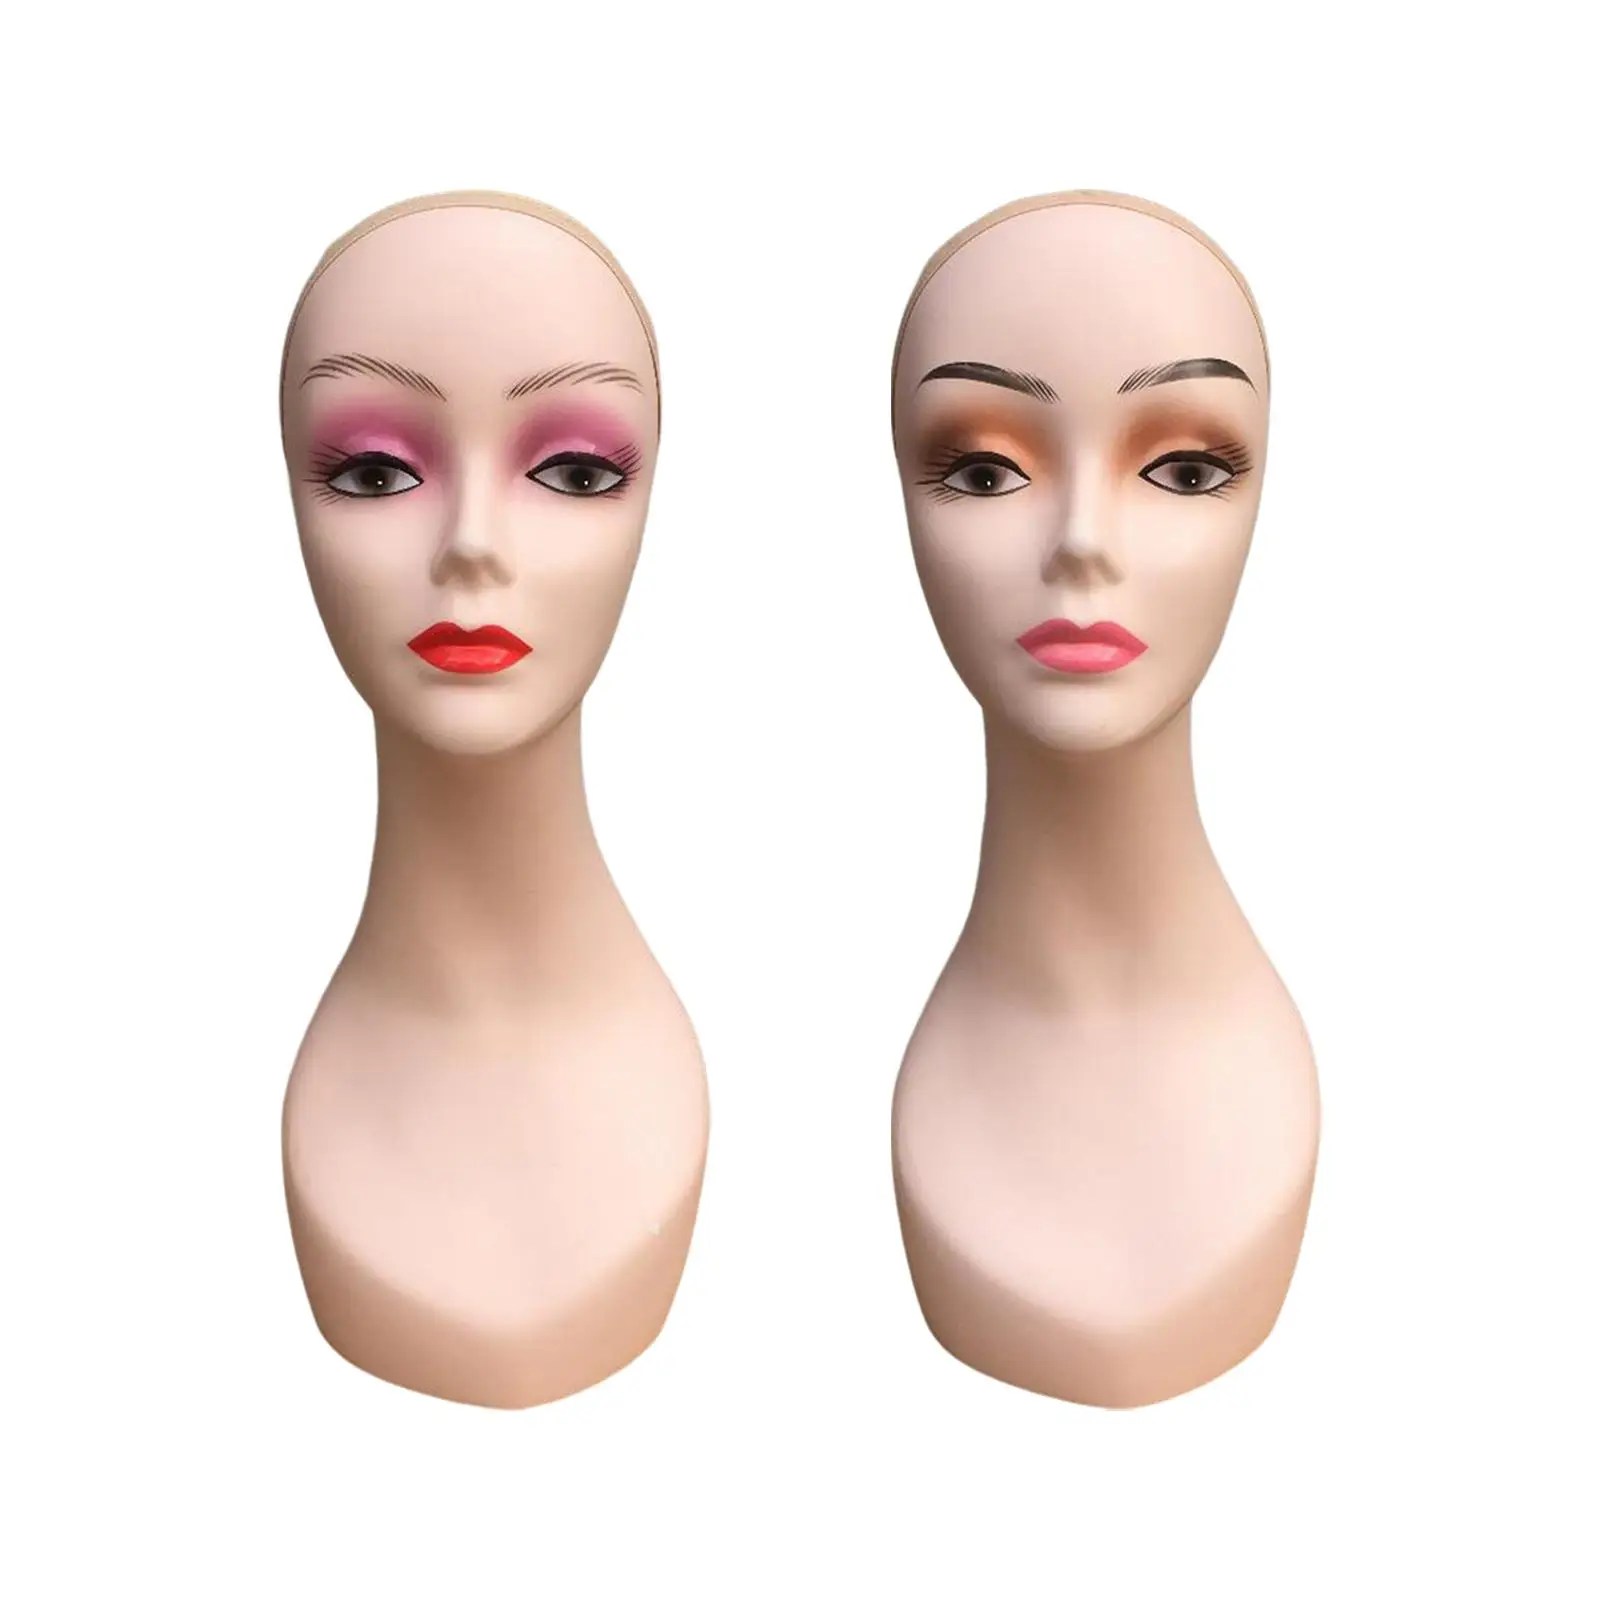 Women Wig Head Mannequin 18.90inch Height Wig Display Stand for Headscarves Hats Glasses Wigs Displaying Necklaces Jewelry